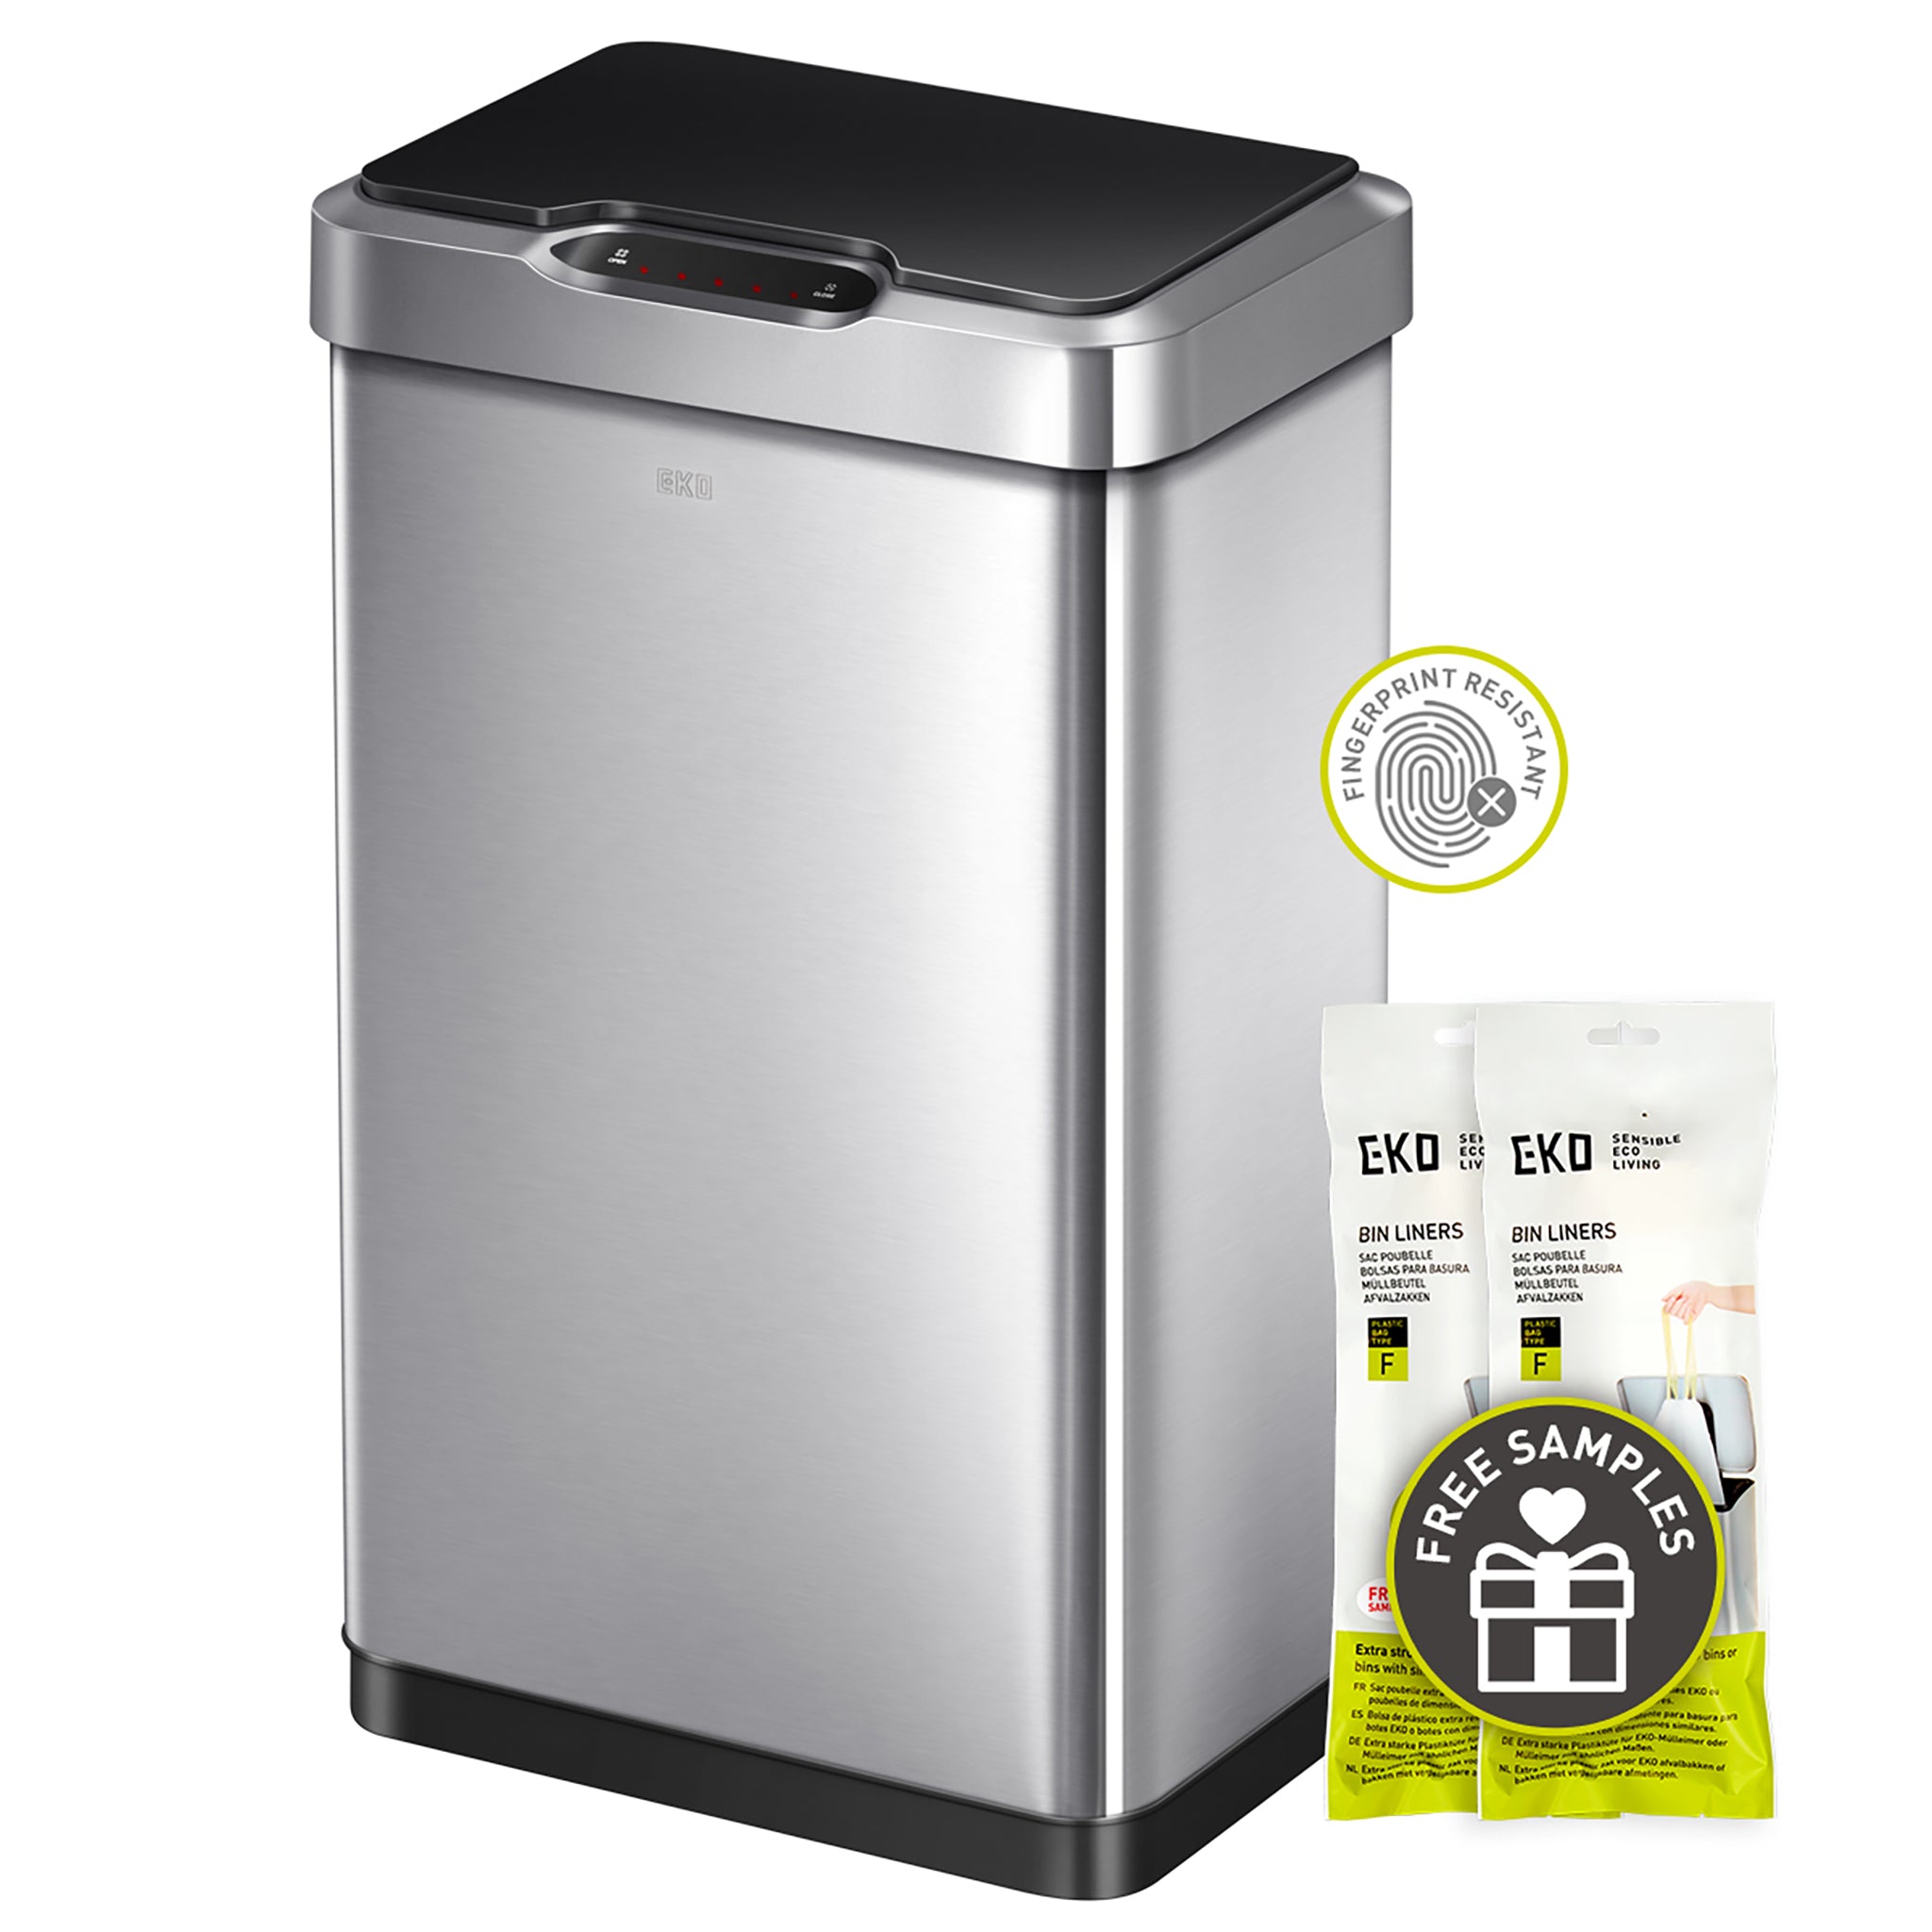 Intelligent Touchless Sensor Stainless Steel Trash Can 13 Gallon